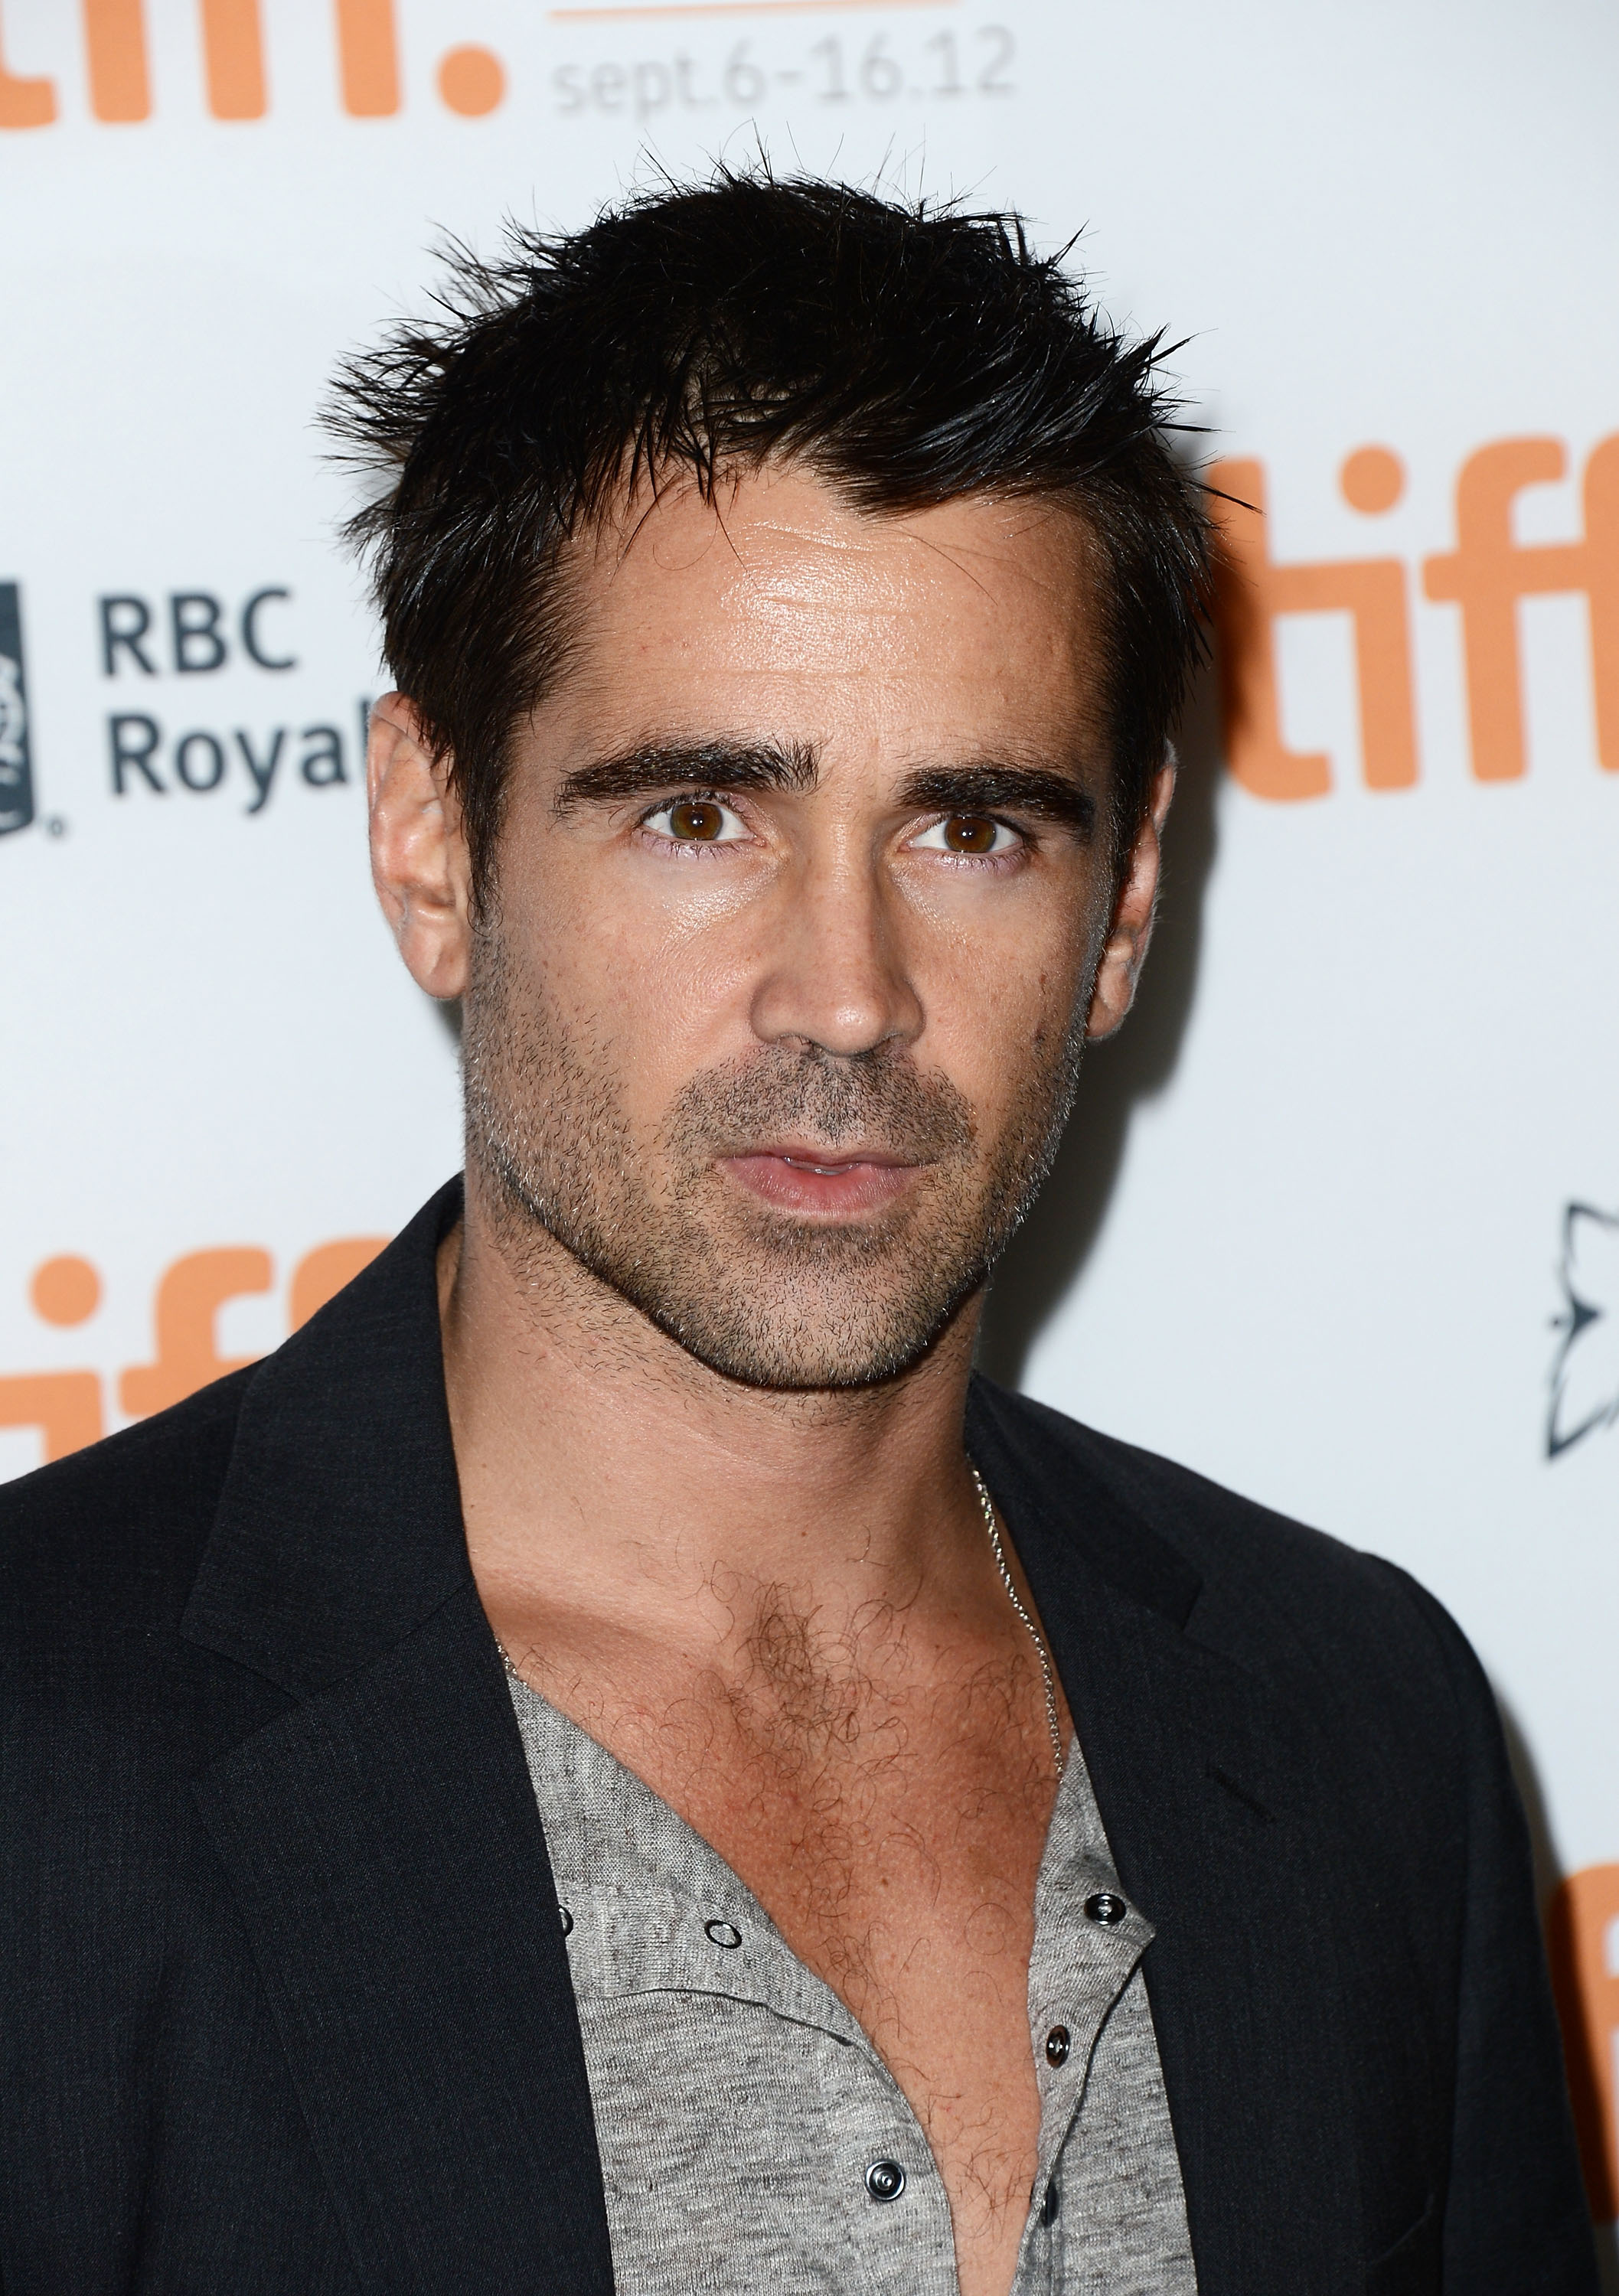 Actor Colin Ferrell attends "Seven Psychopaths" premiere during the 2012 Toronto International Film Festival at Ryerson Theatre on Sept. 7, 2012 in Toronto. (Mark Davis—Getty Images)